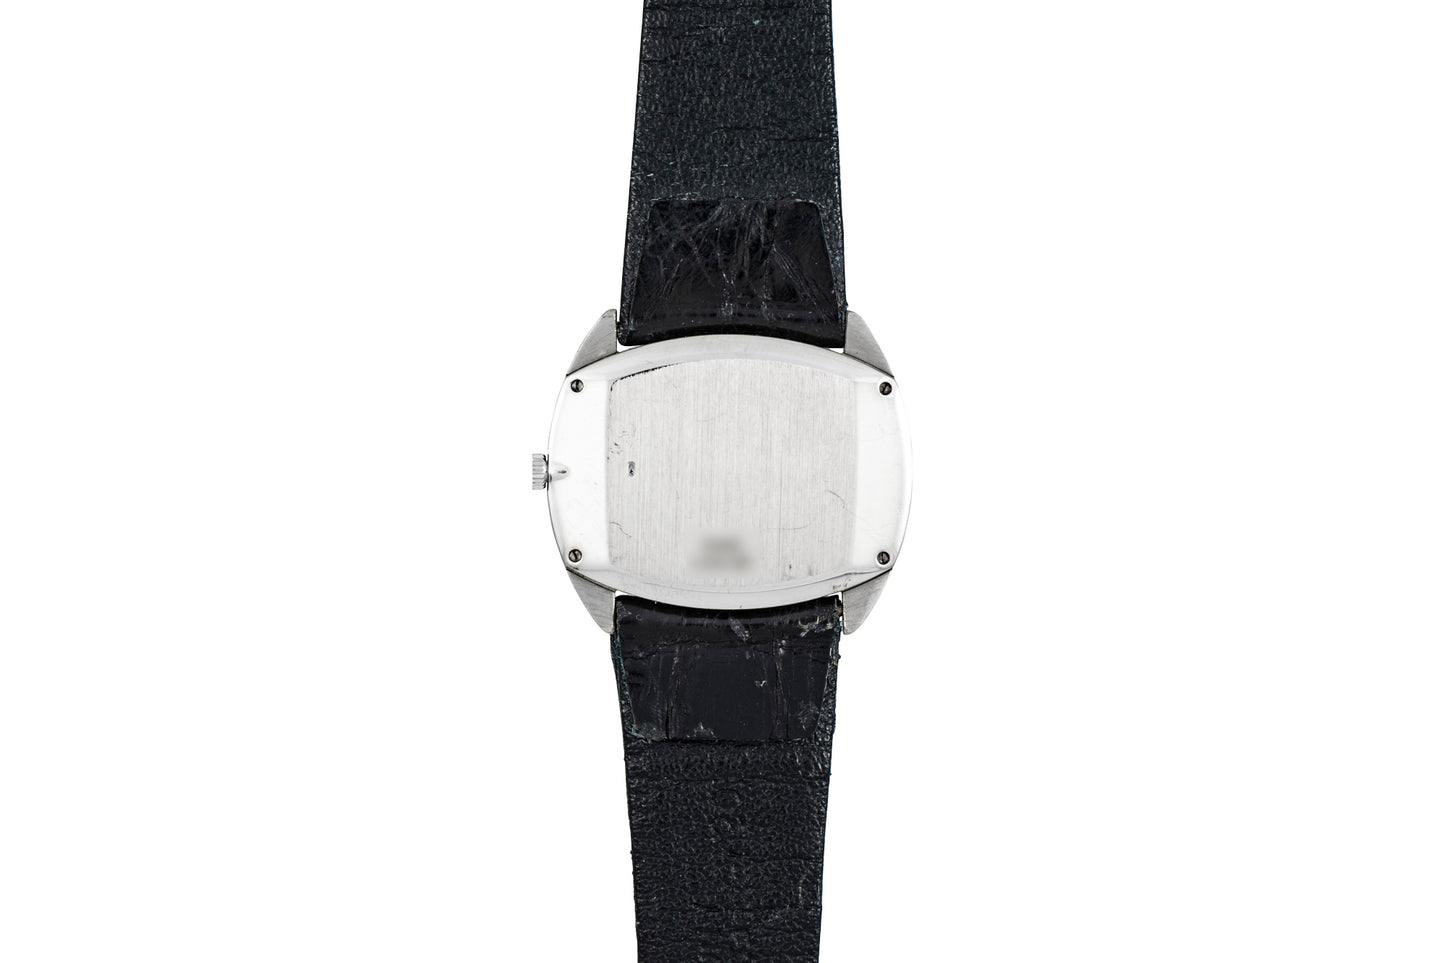 Piaget White Gold 'Zebra Mother Of Pearl' Dress Watch – Analog:Shift